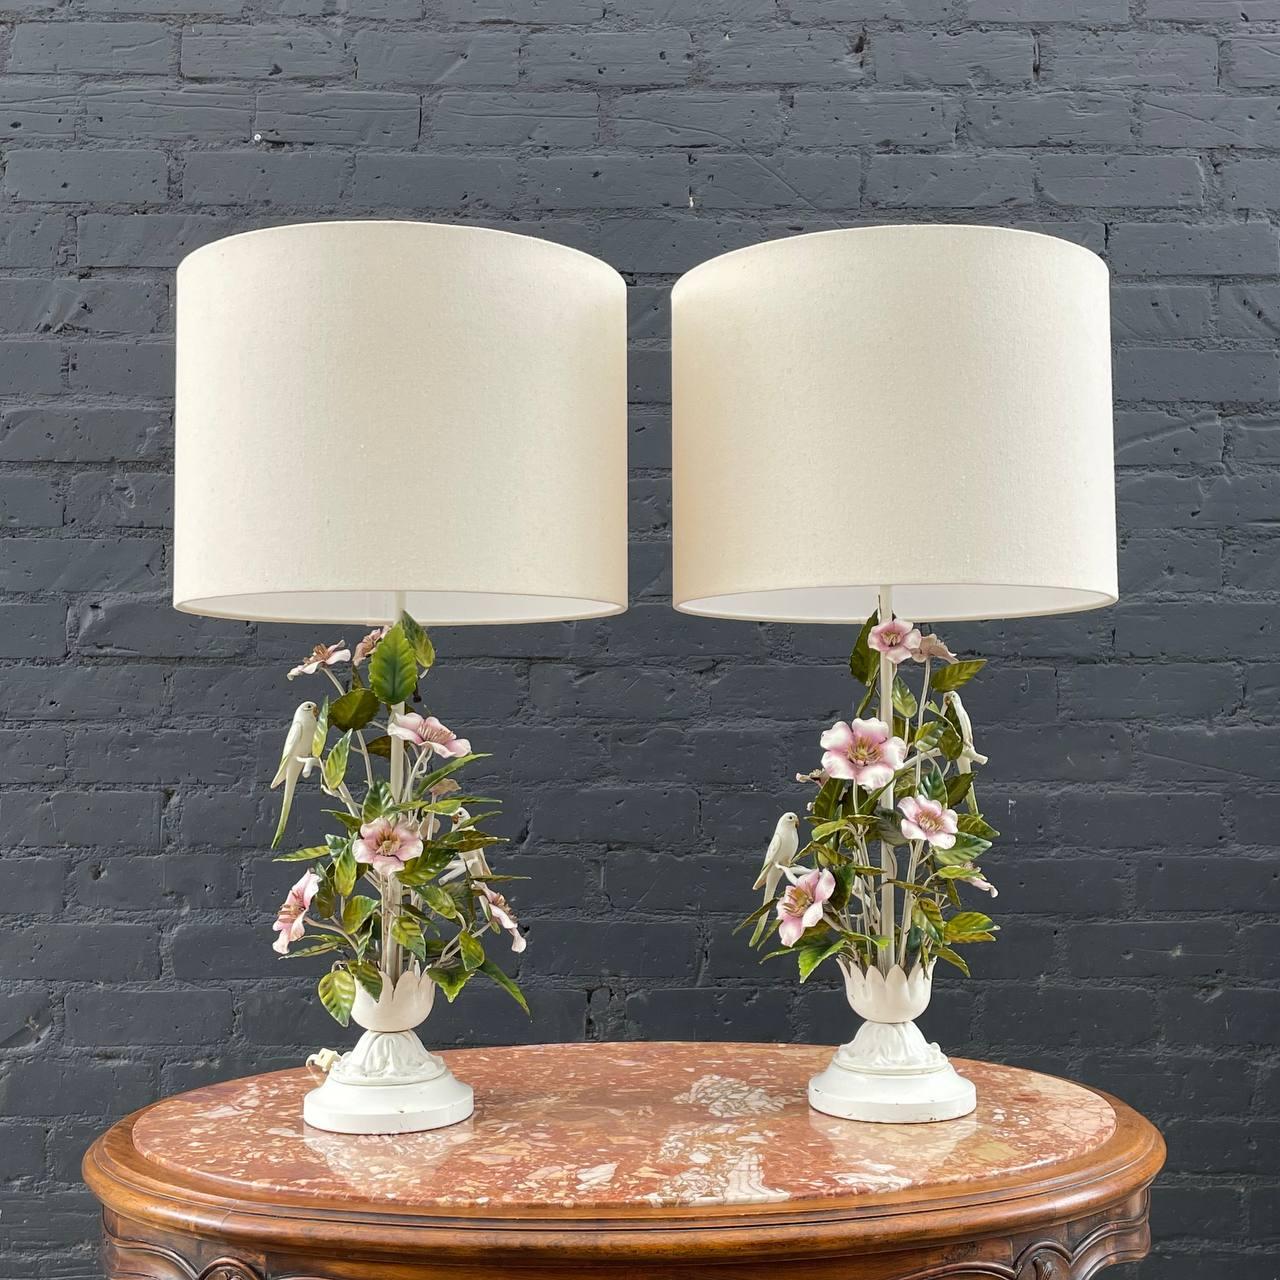 Pair of Italian Tole-Painted Pink Magnolias & Love Birds Table Lamps 

Country: Italy
Materials: Metal
Condition: New Sockets & Harps, New Custom Linen Shades
Style: Italian Antique
Year: 1950s

$1,895 pair 

Dimensions:
28”H x 10”W x